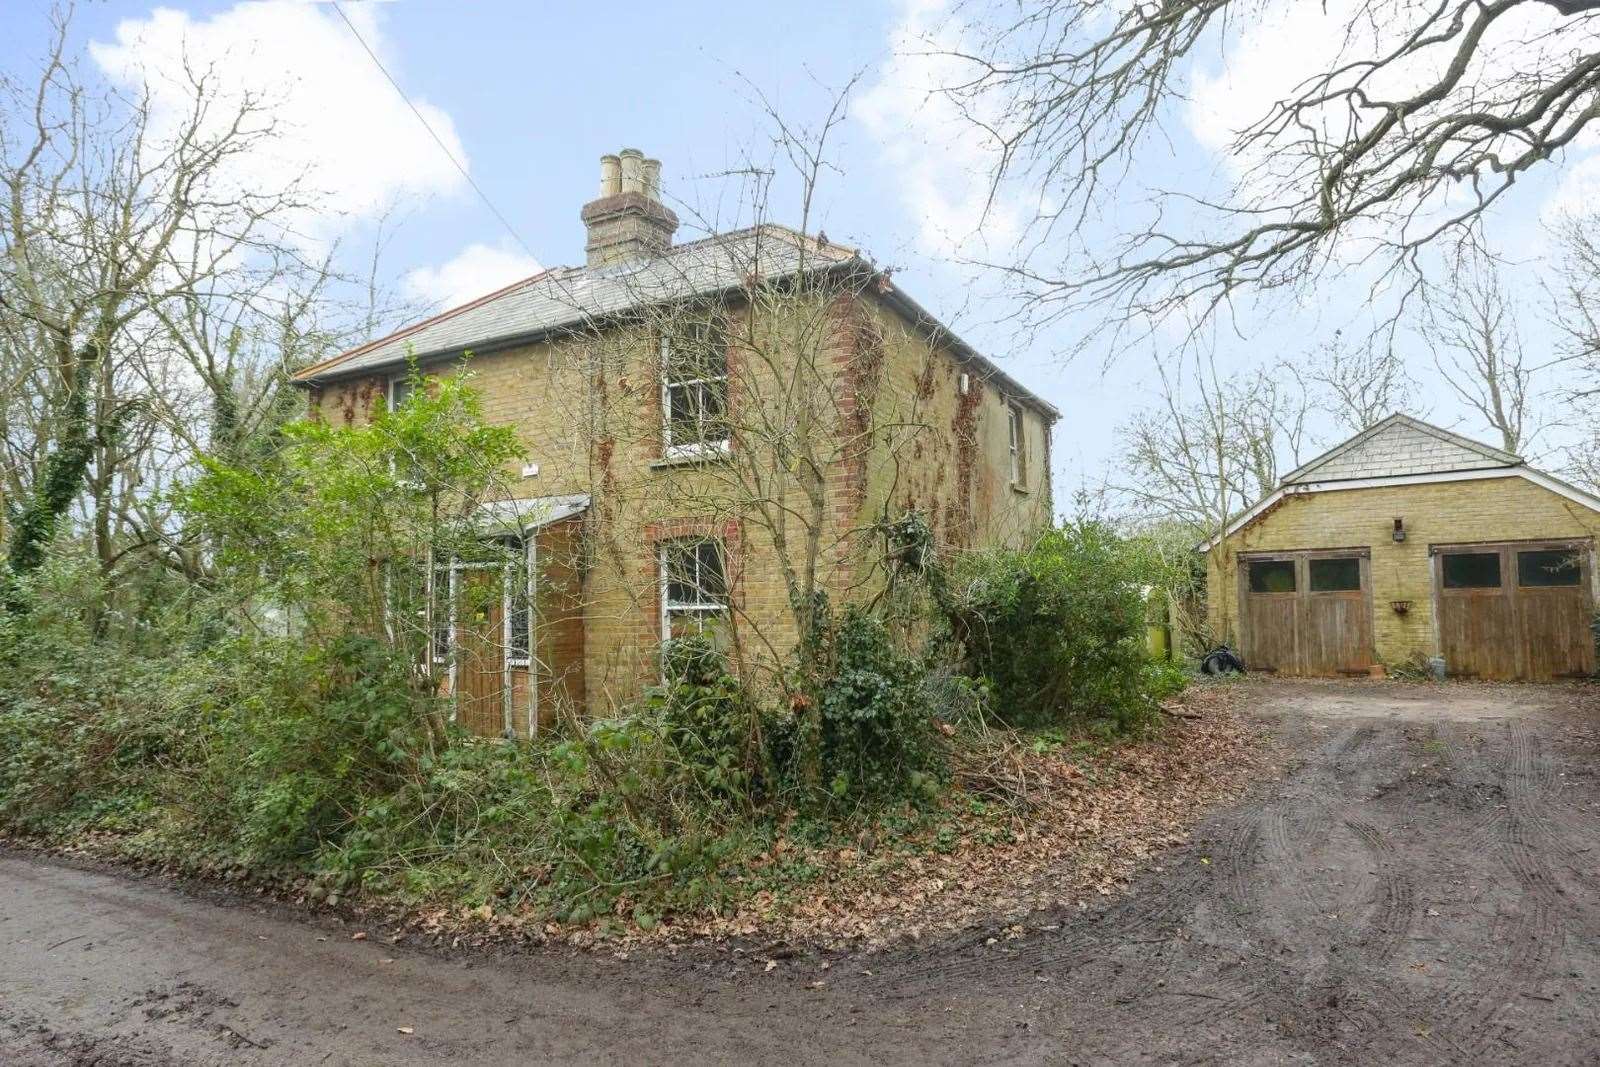 This 4-bedroom detached house is currently on the market for £1M. Photo: Zoopla